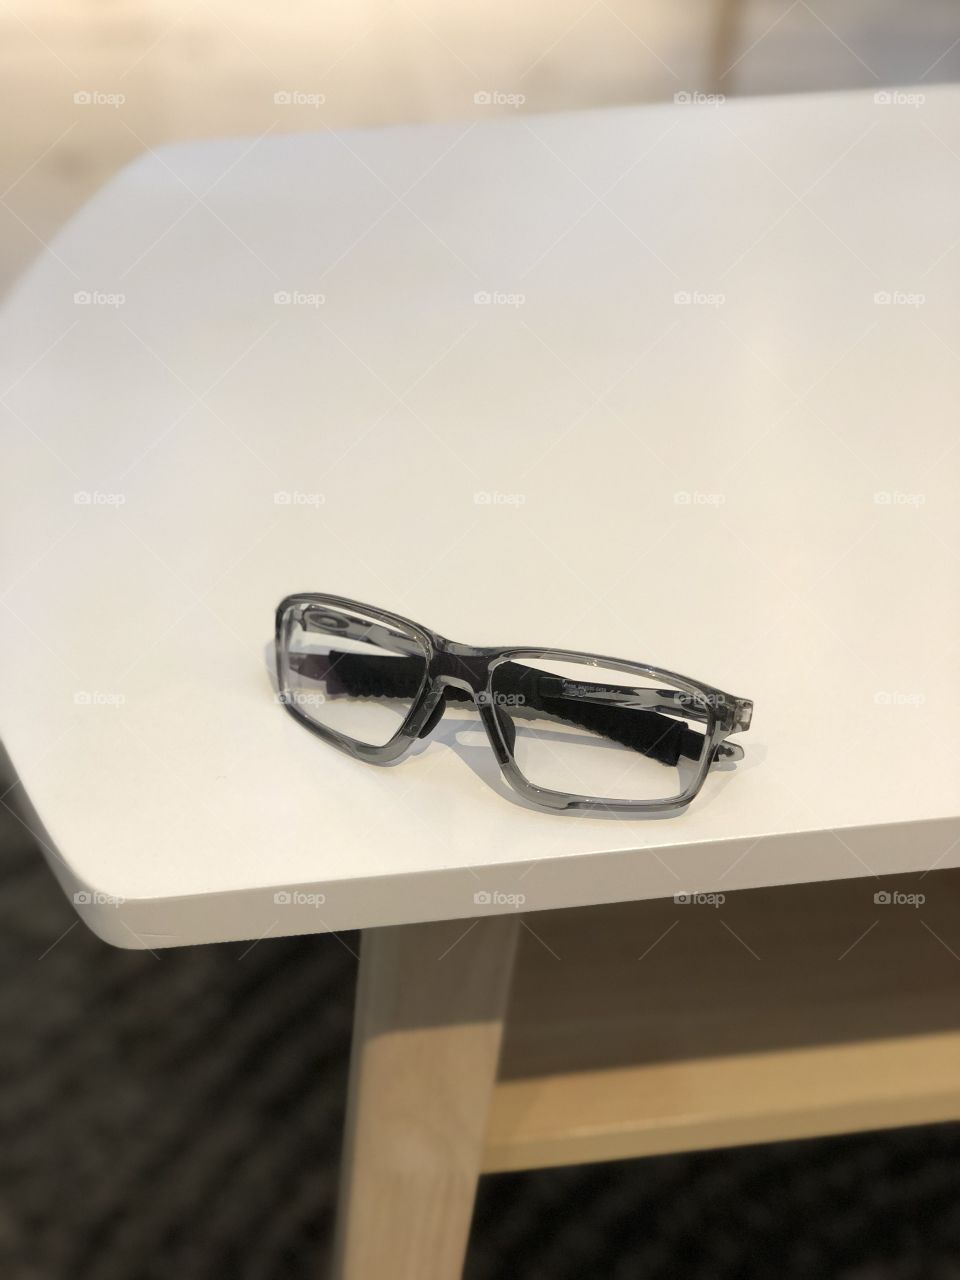 Grey glasses on white table top